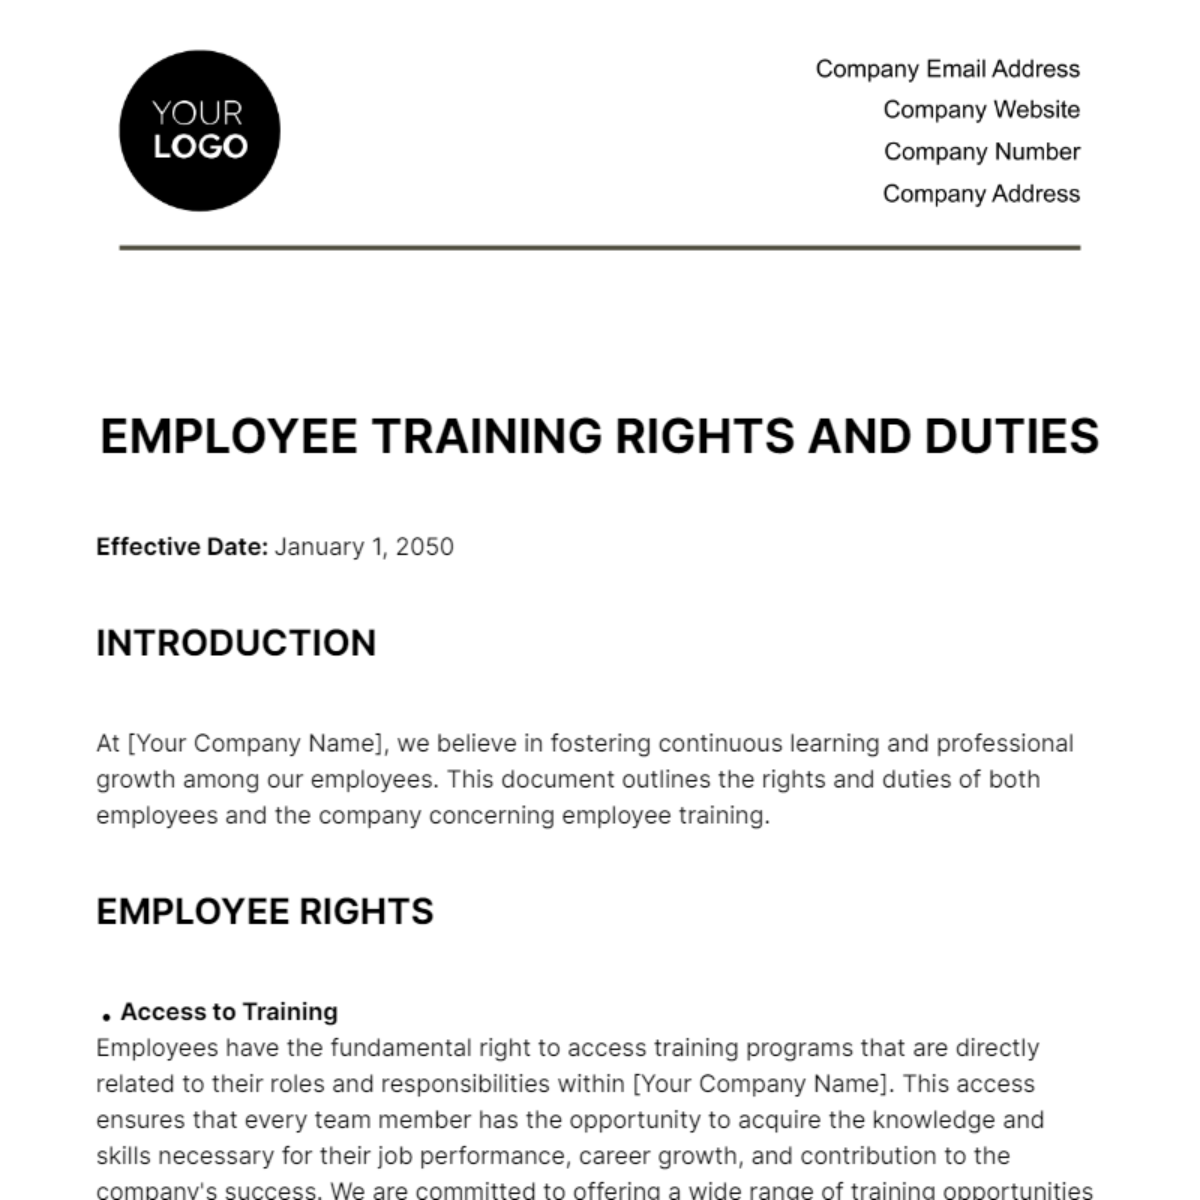 Free Employee Training Rights & Duties HR Template